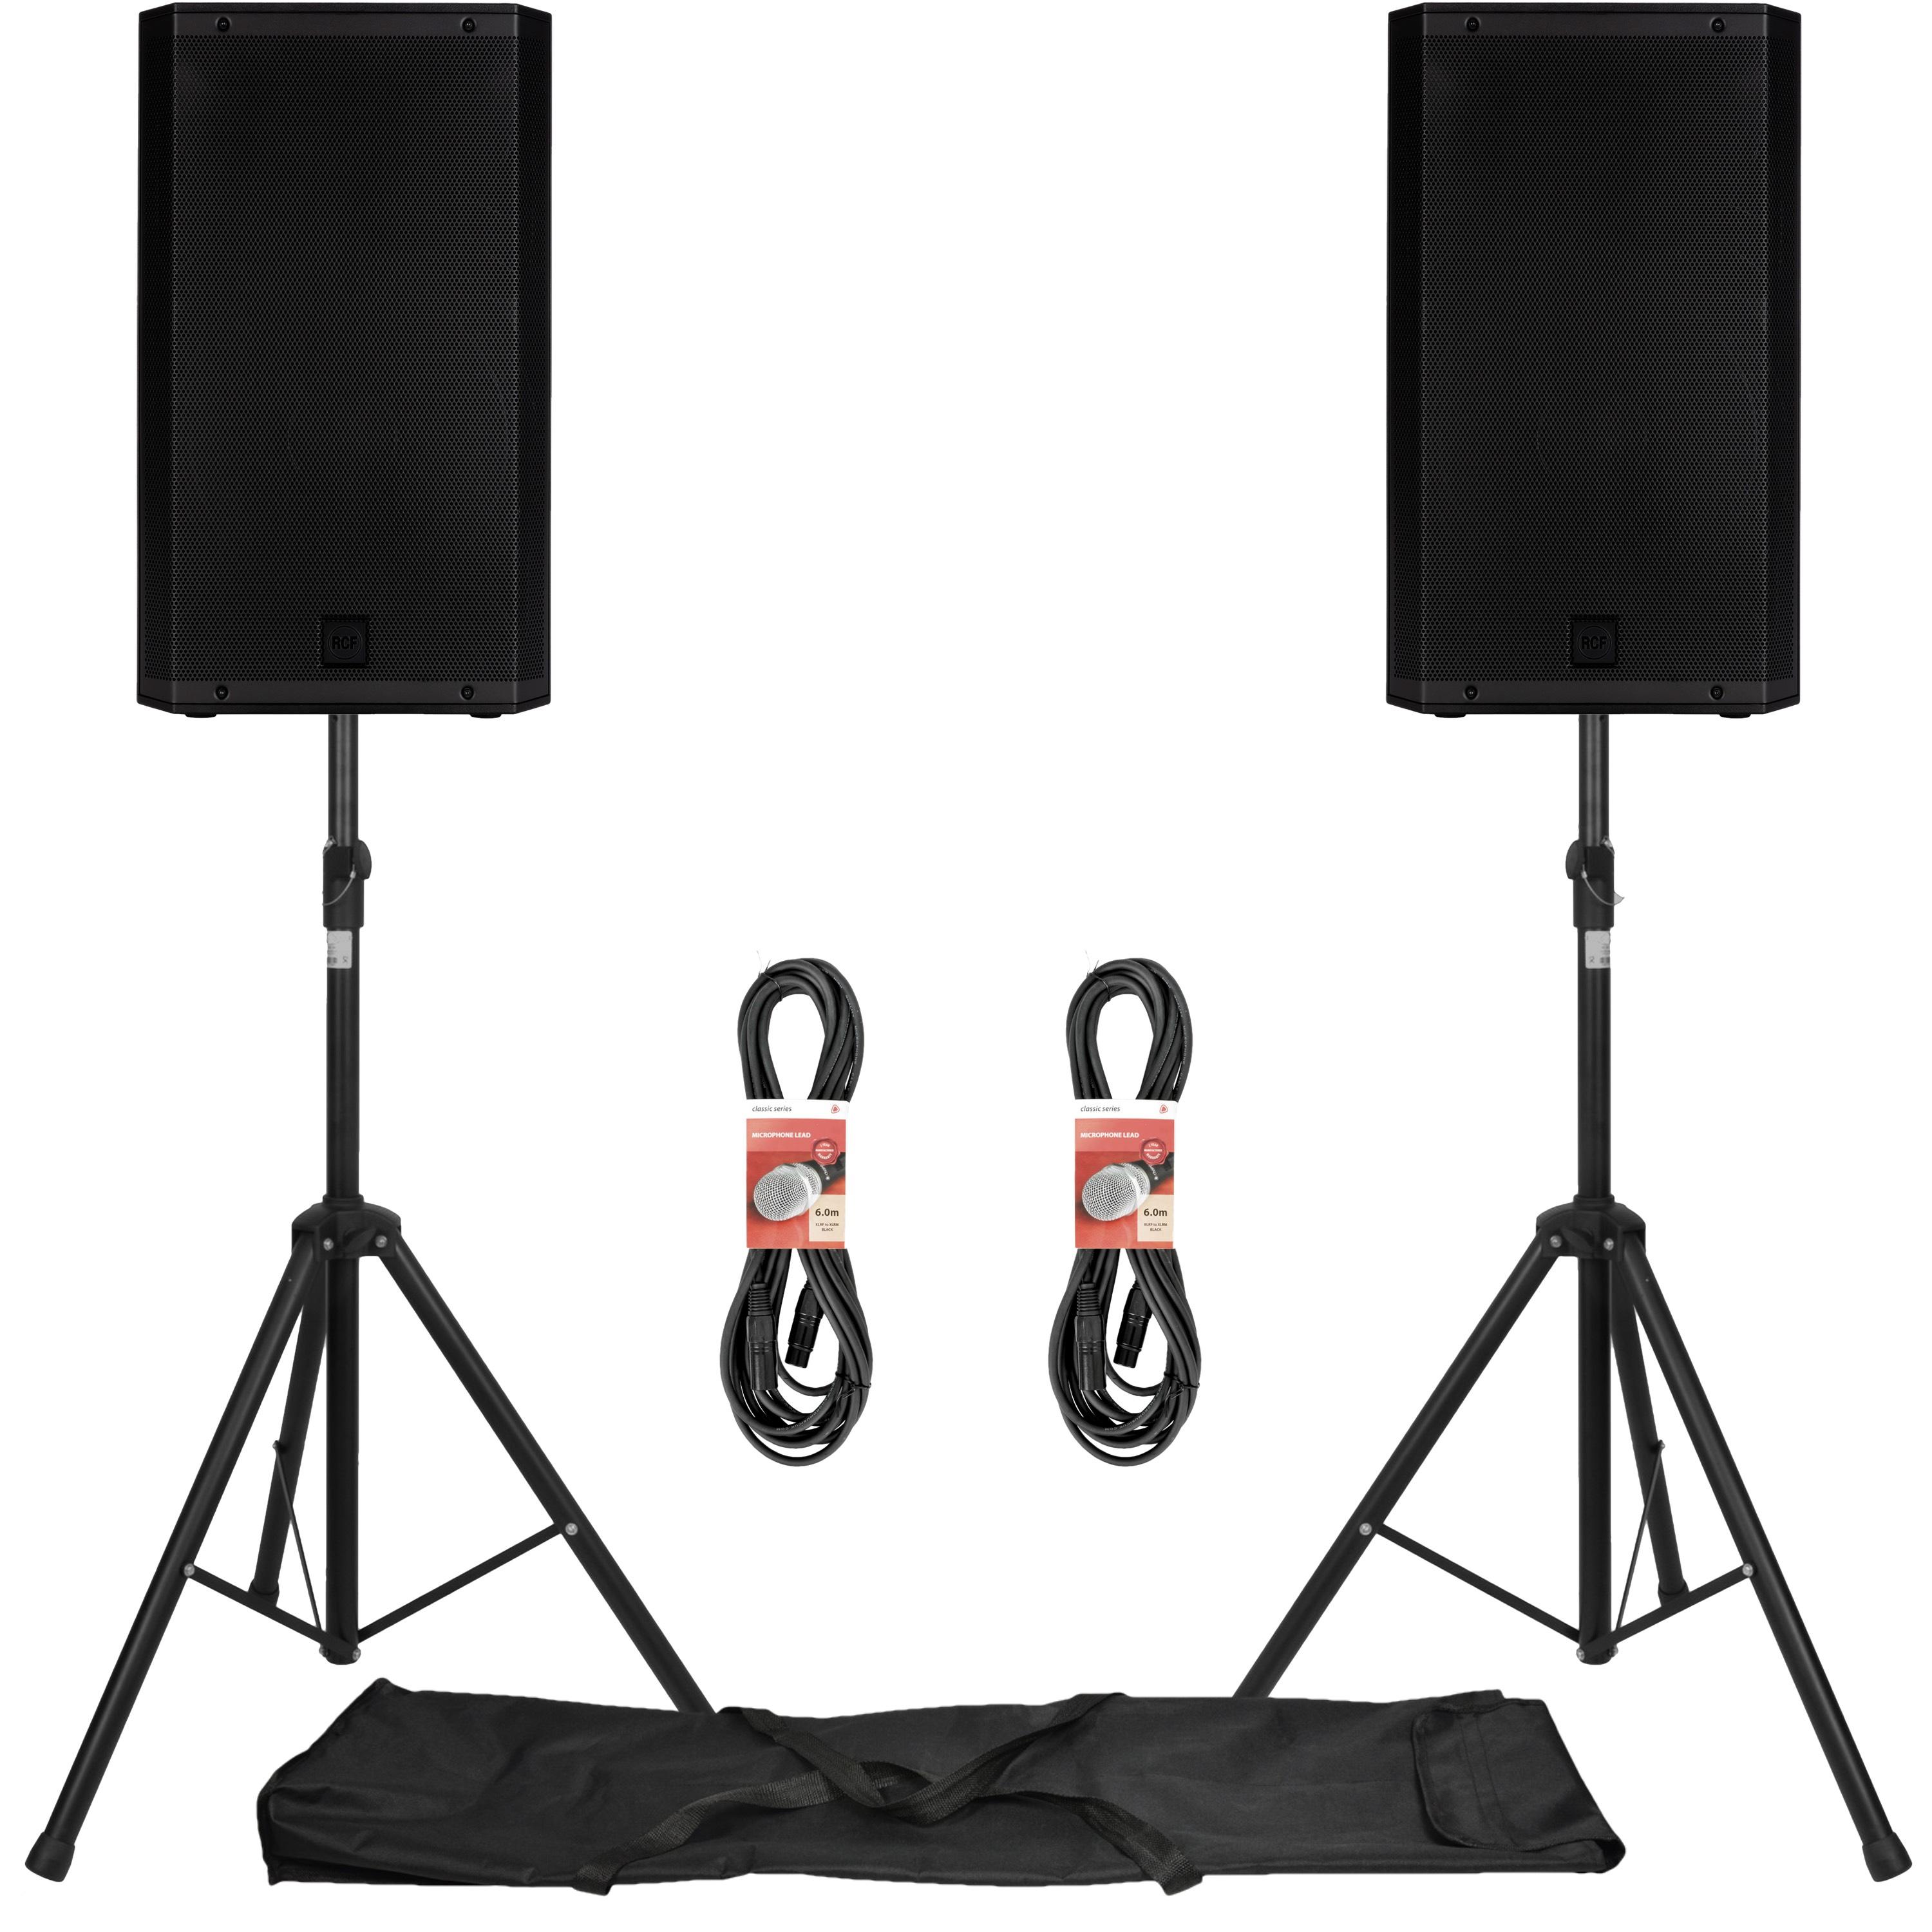 RCF ART 915-A Professional Active Speaker System